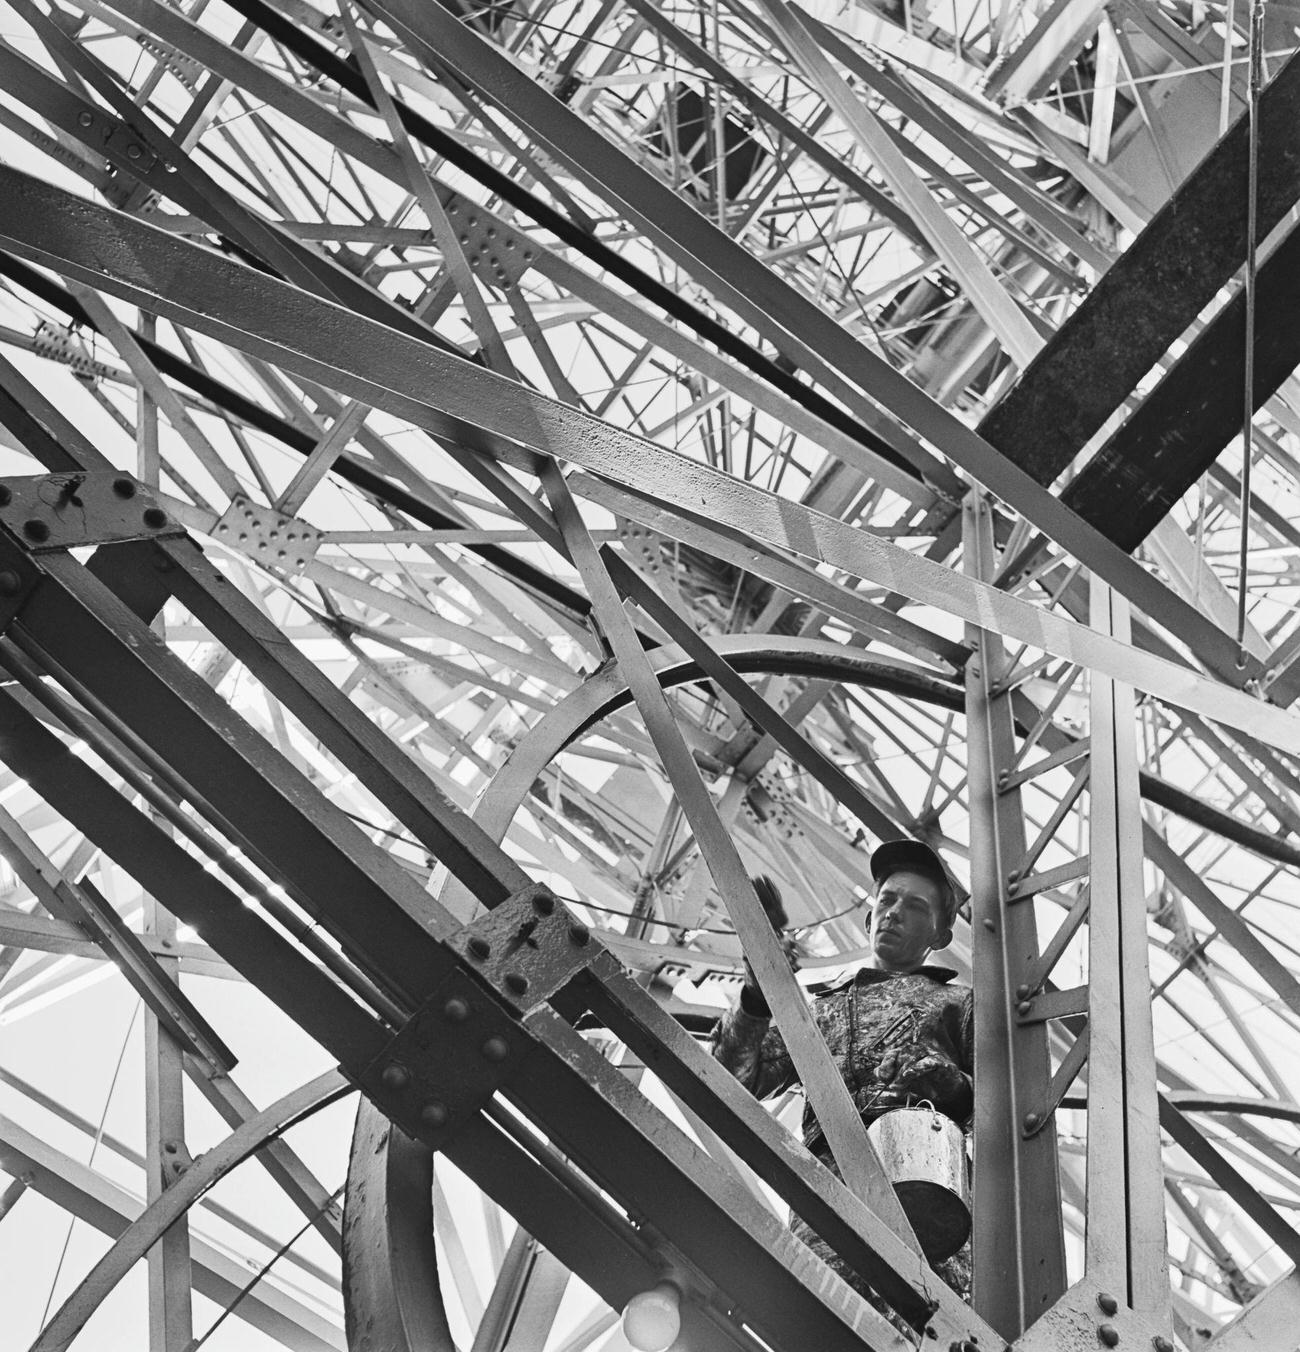 Worker Painting Ride Trestle At Coney Island, 1950